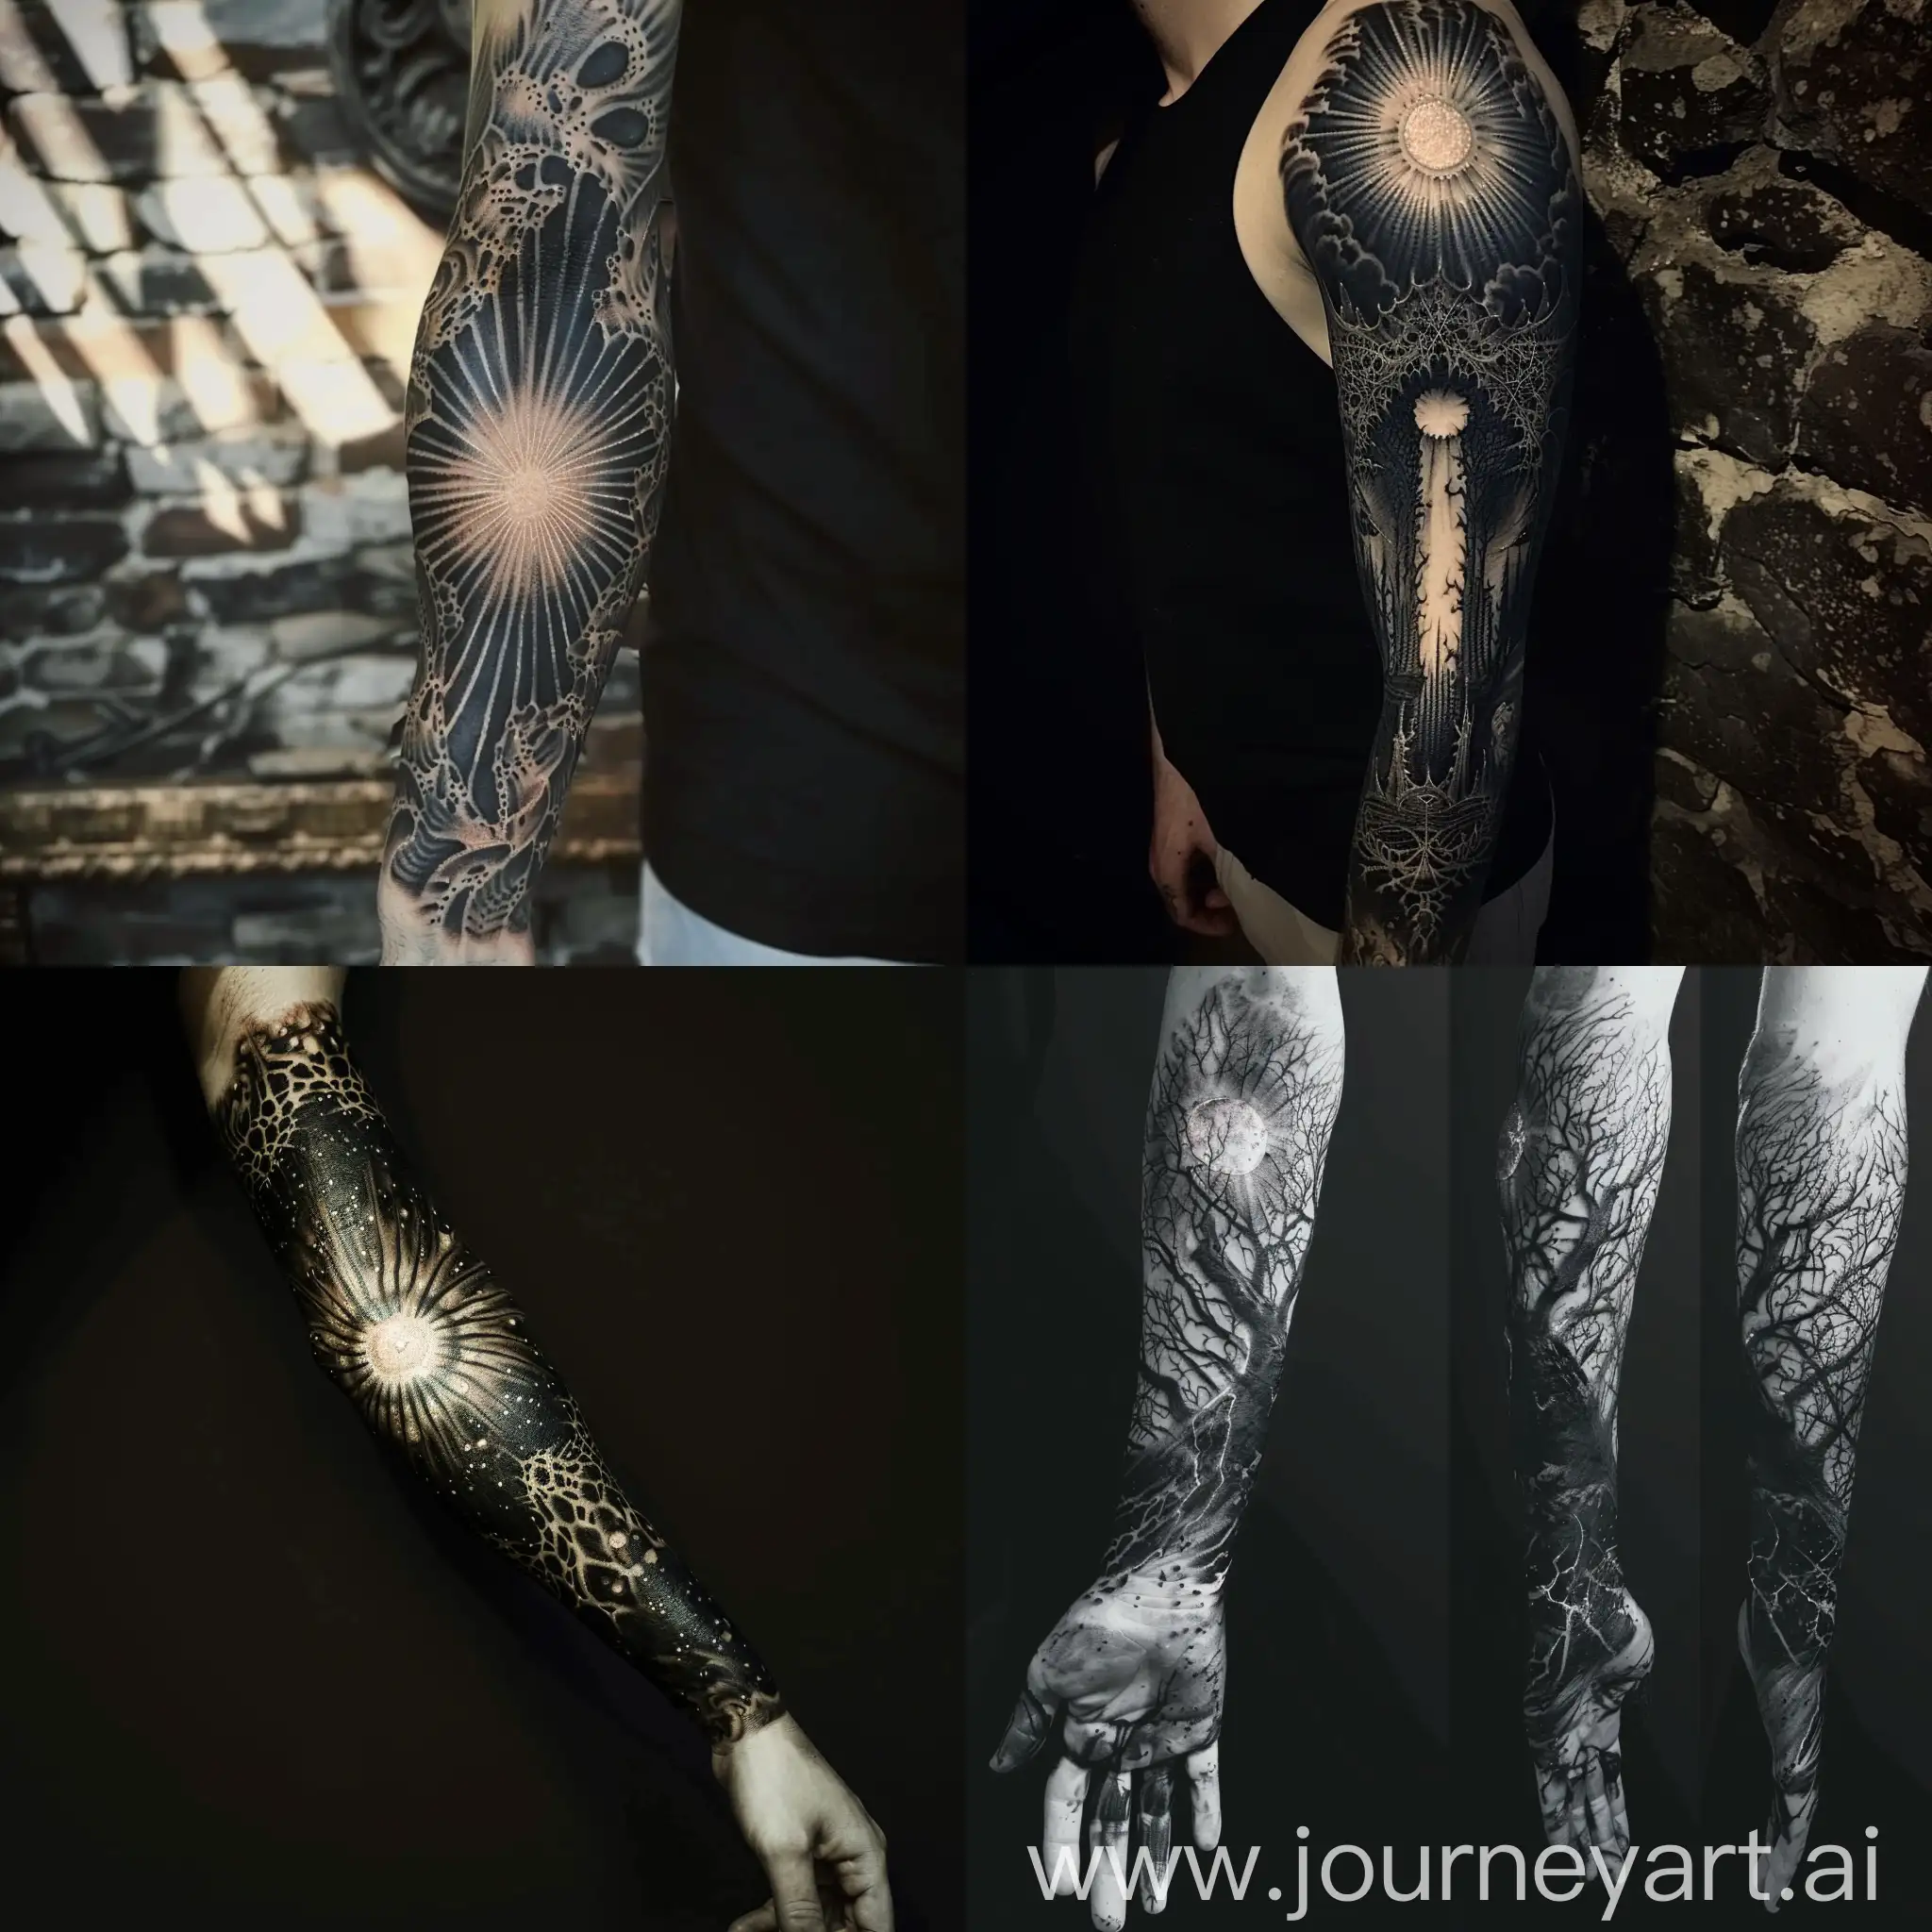 A full arm sleeve tattoo. It's pitch black at the rims, but features in the middle a core of light, like a metaforical sun shining through the darkness.
